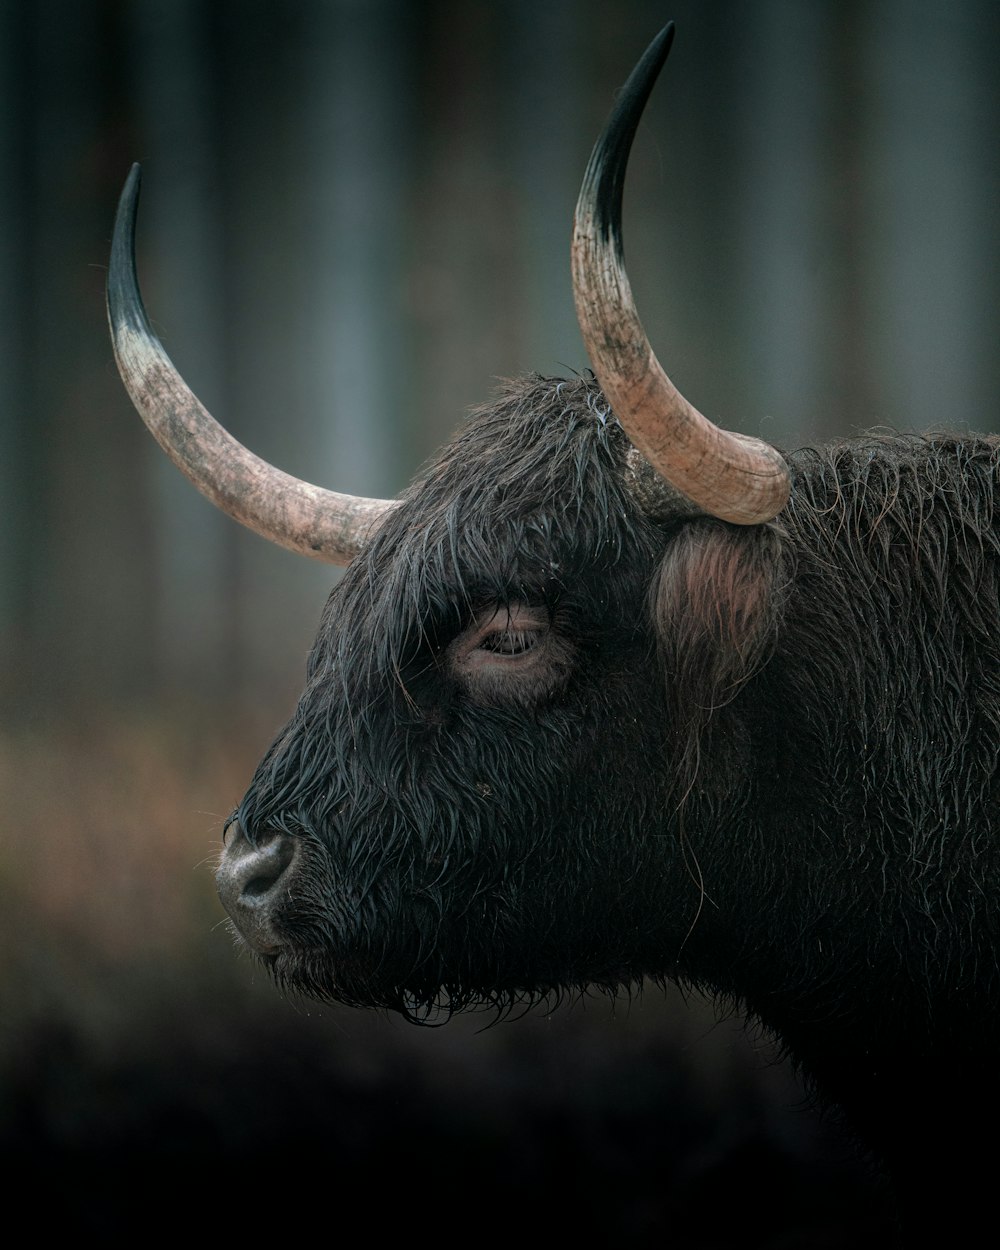 a close up of a bull with long horns